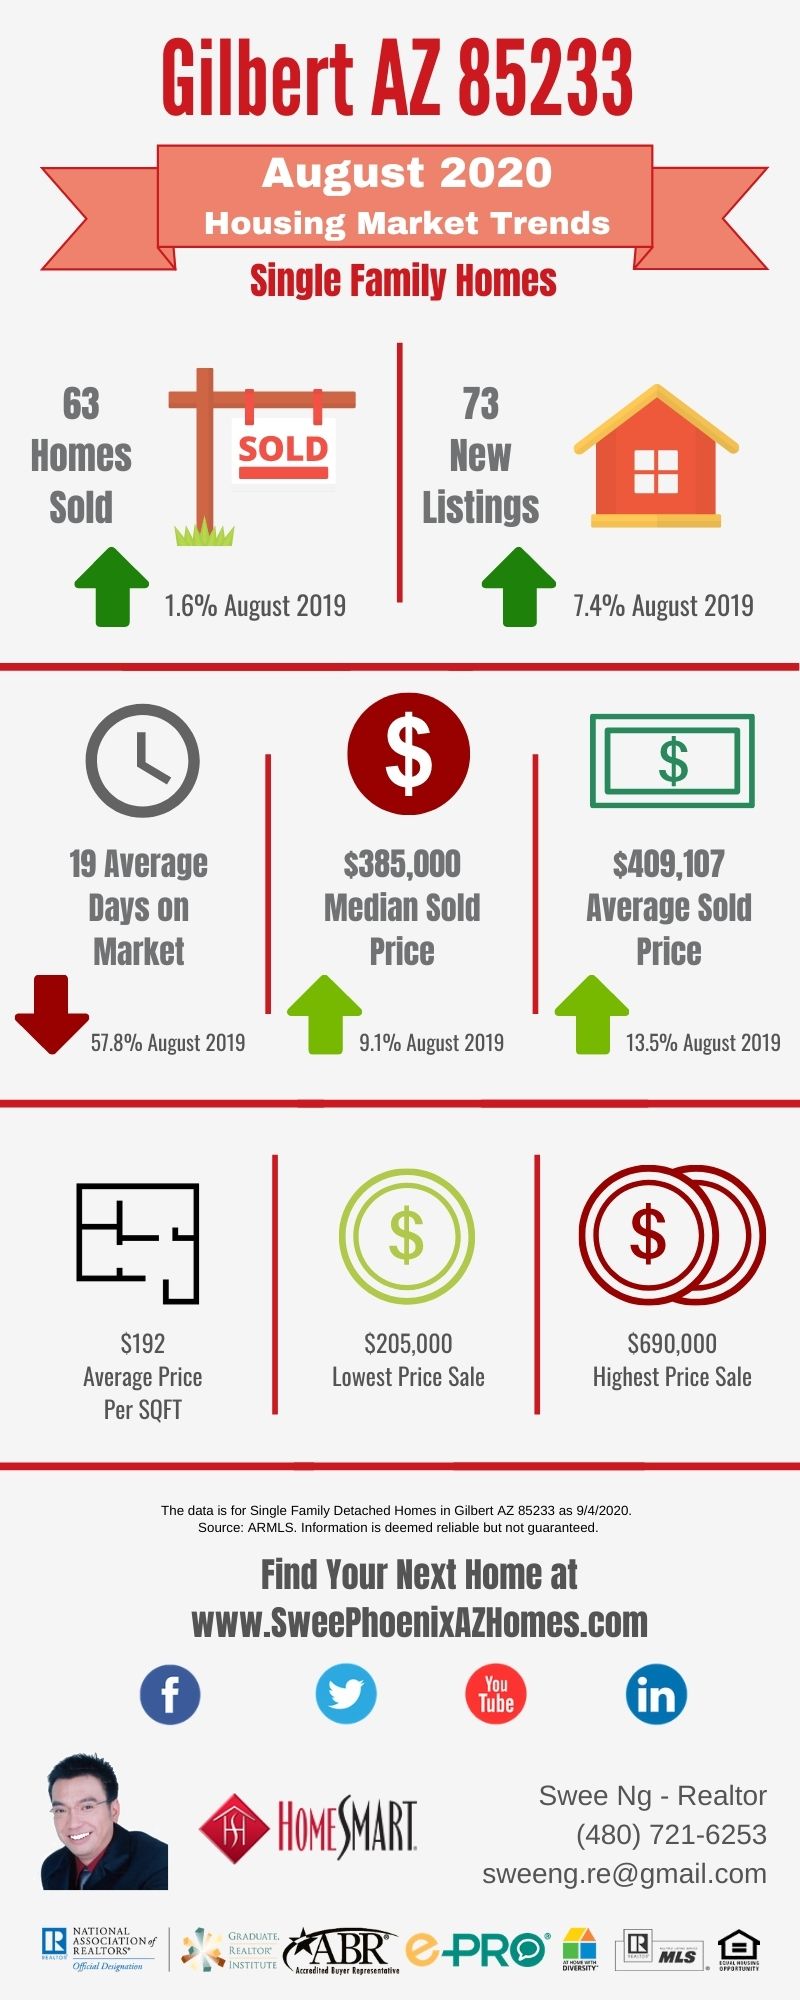 Gilbert AZ 85233 Housing Market Trends Report August 2020 by Swee Ng, Real Estate and House Value